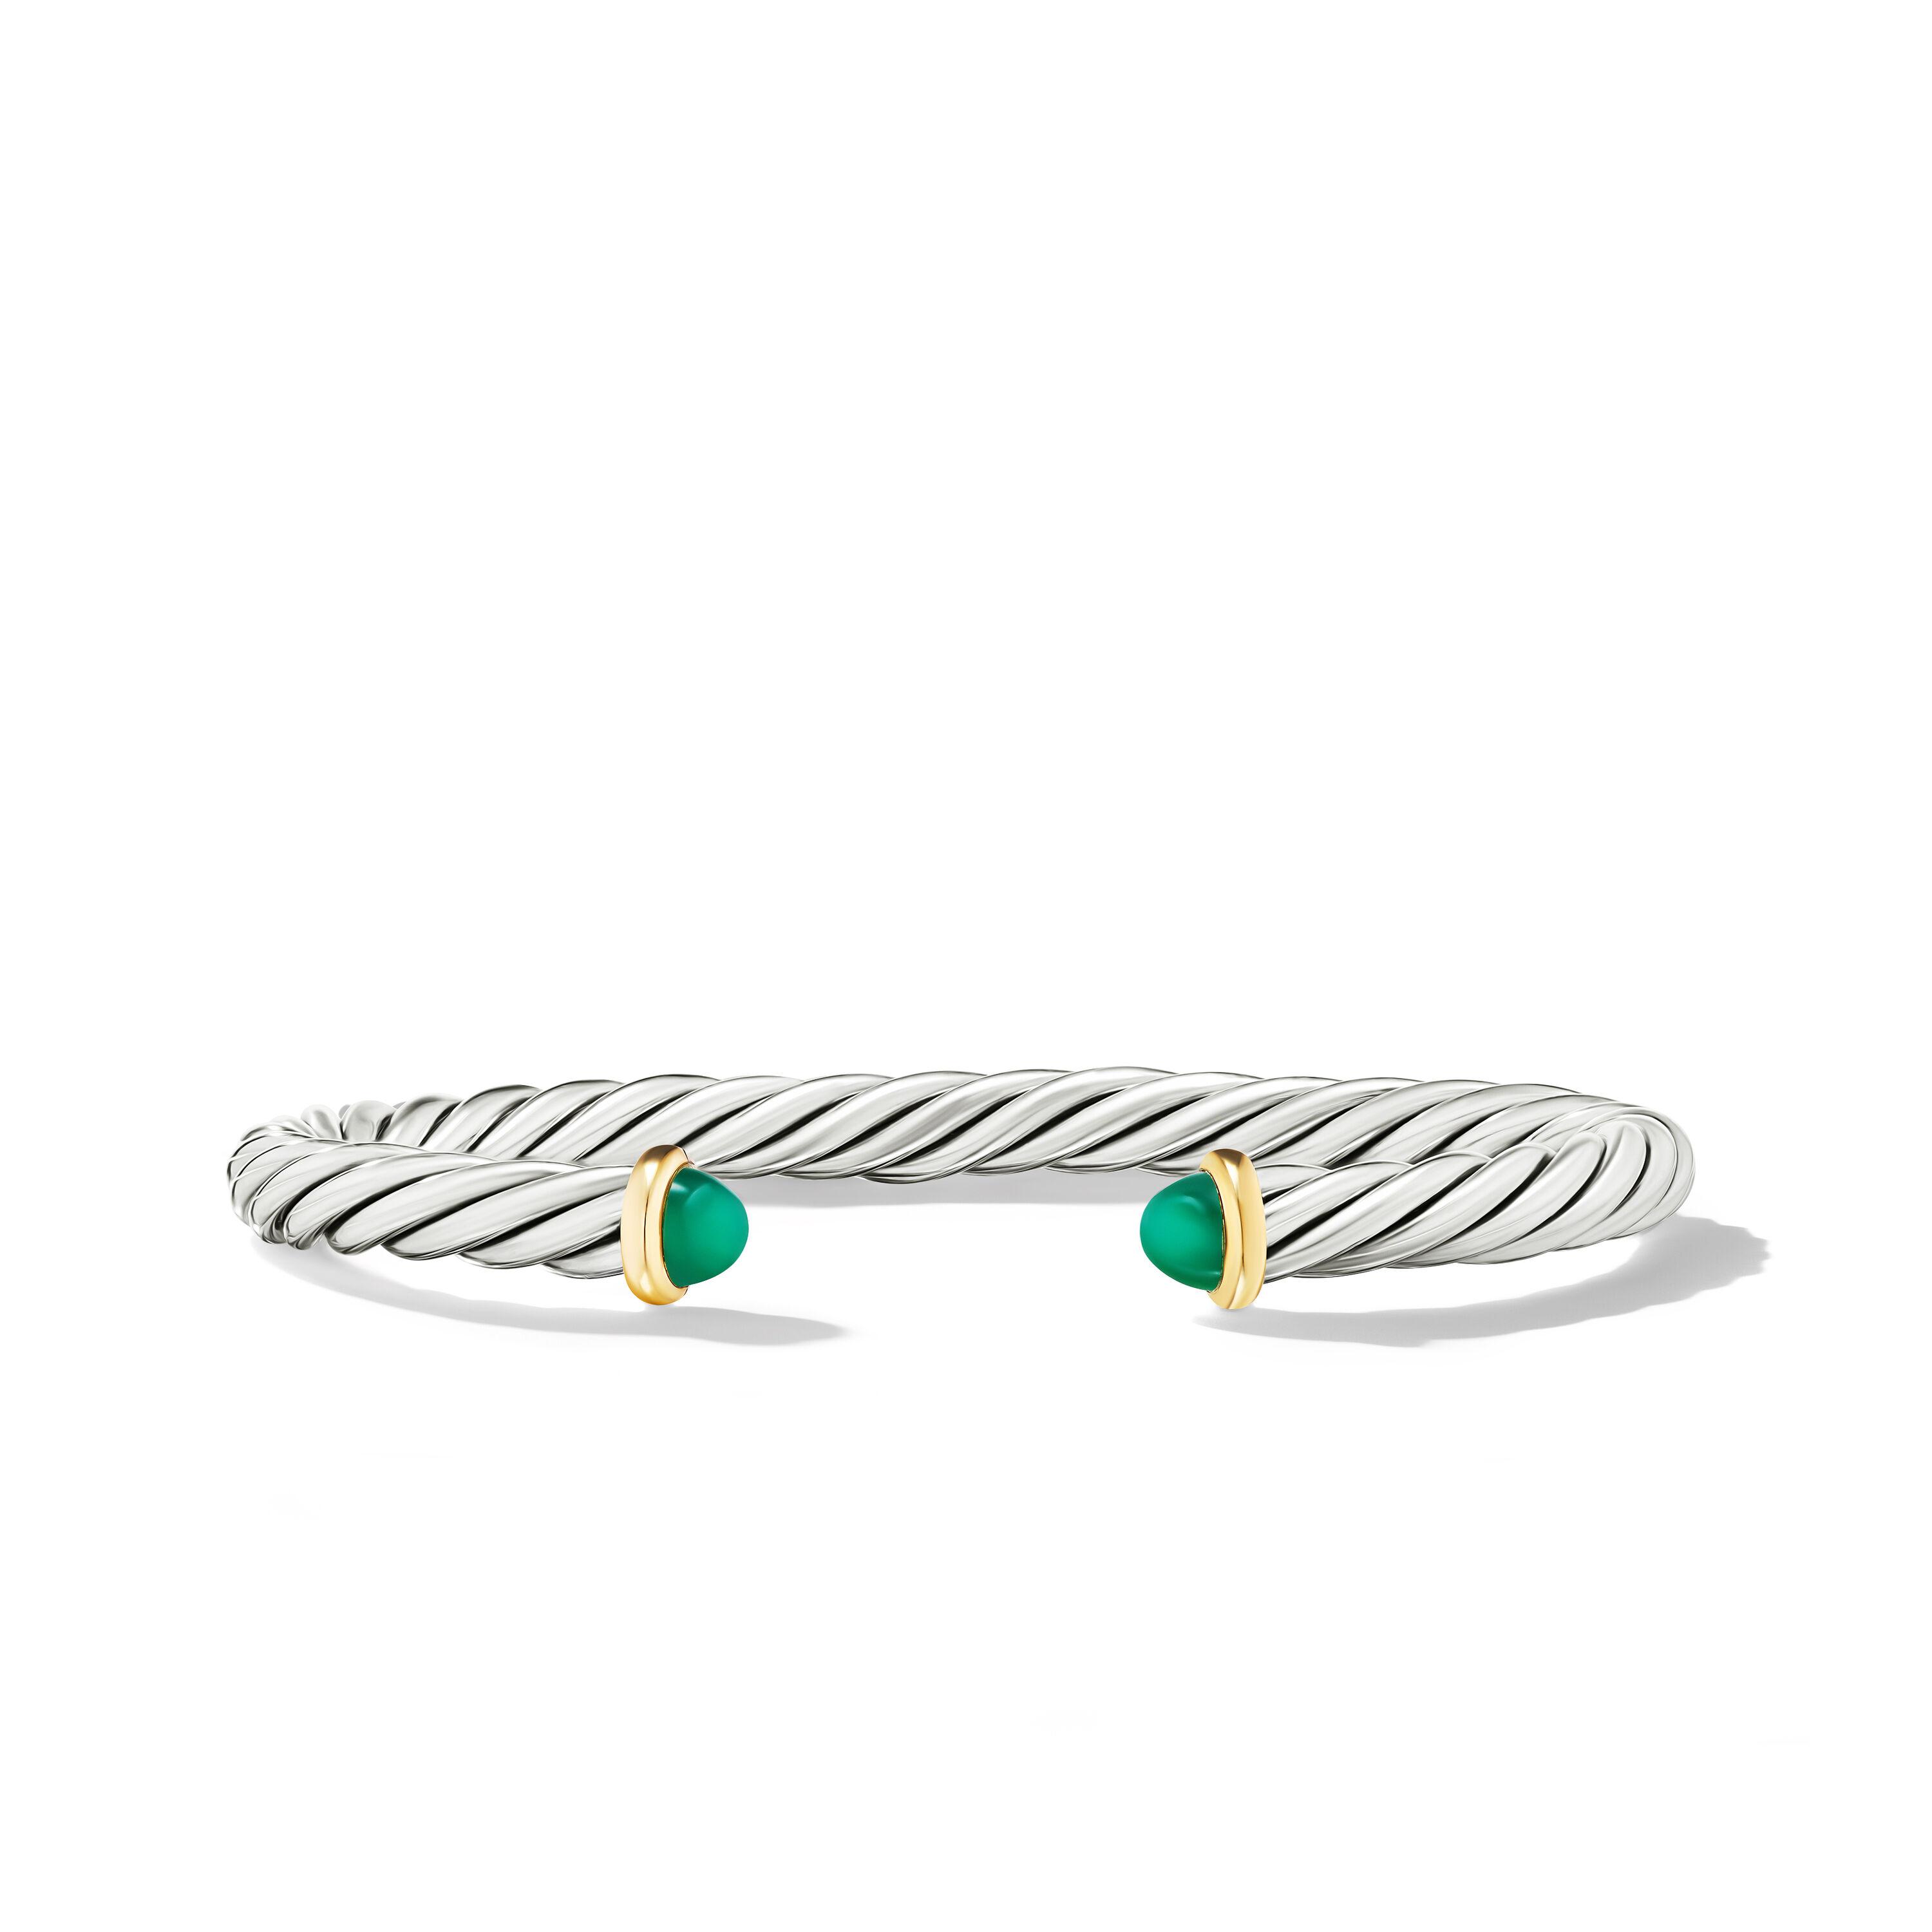 David Yurman 6mm Cable Cuff Bracelet in Sterling Silver with 14K Yellow Gold and Green Onyx, Medium